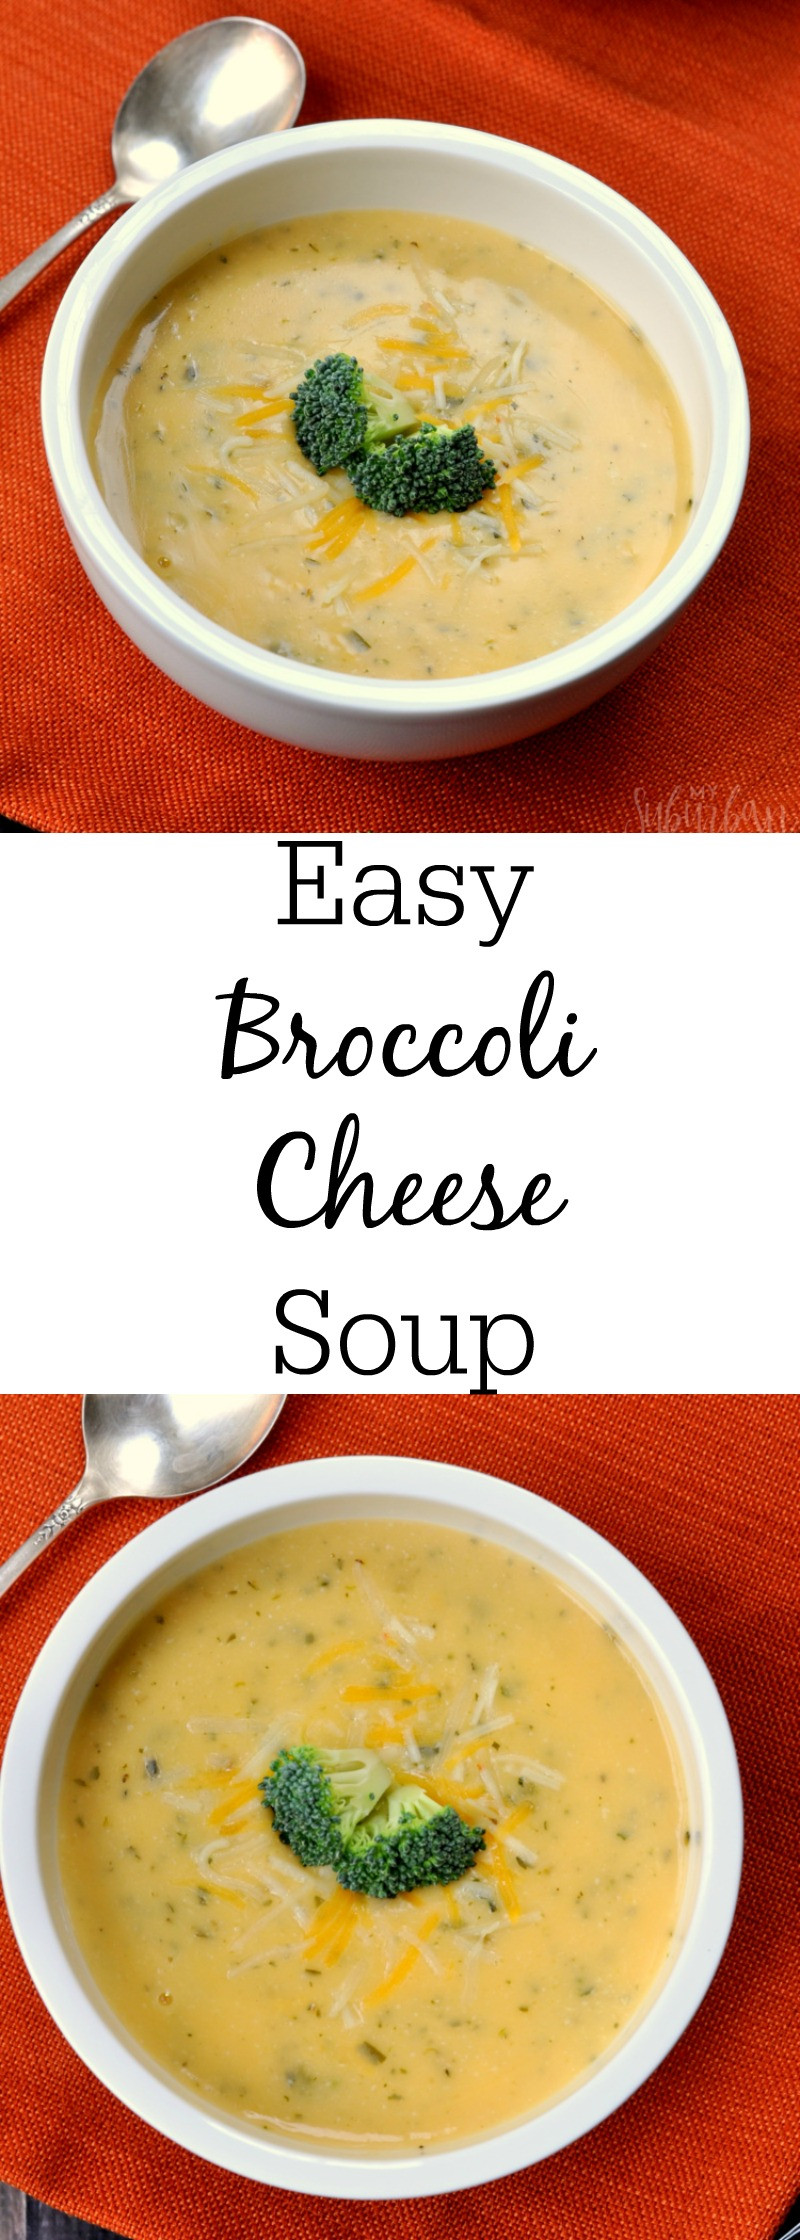 Easy Broccoli Soup
 Shaved Brussels Sprouts Salad and Cheddar Broccoli Soup